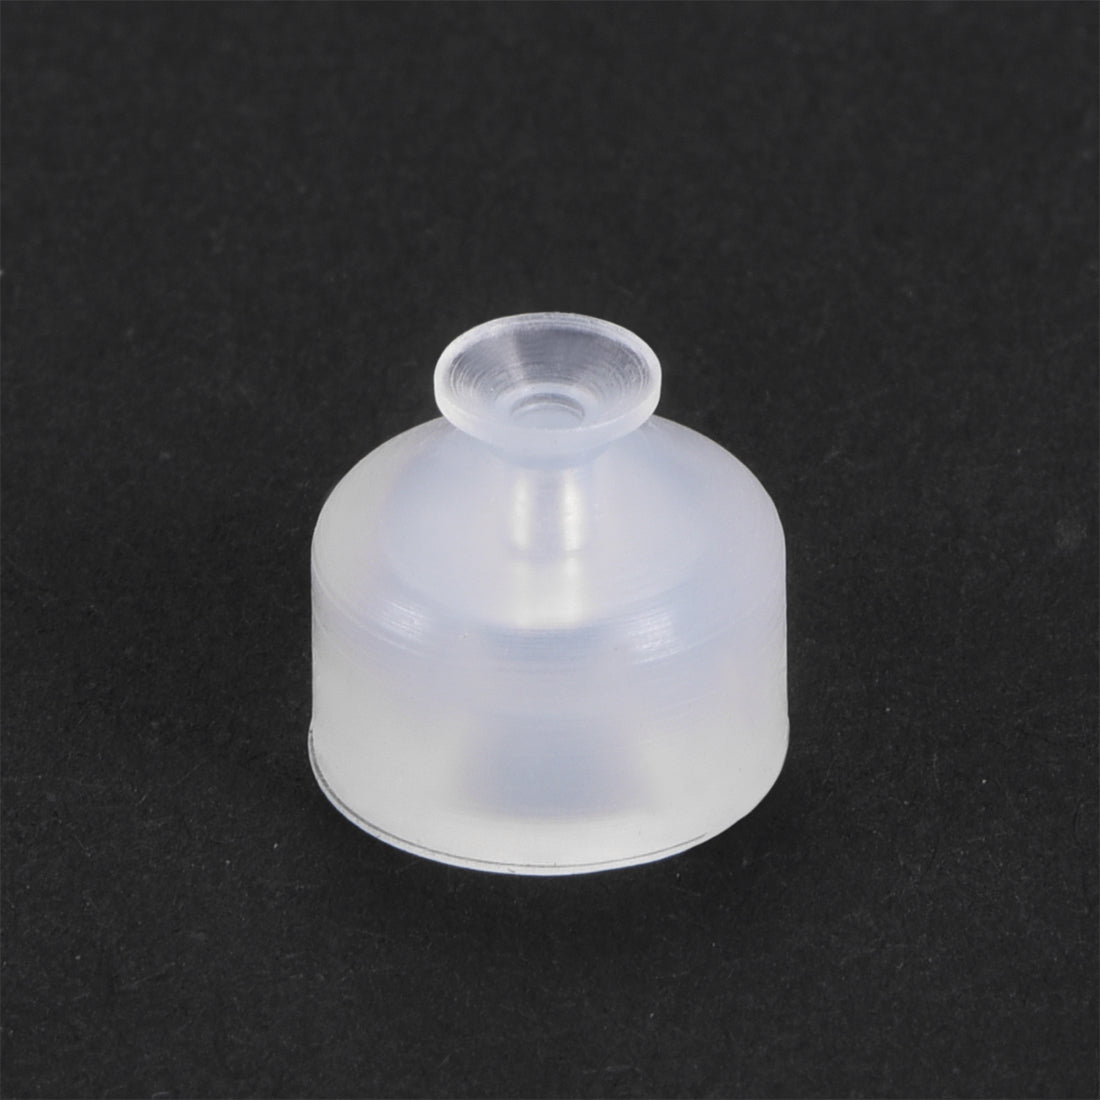 uxcell Uxcell Clear White Soft Silicone Waterproof  Miniature Vacuum Suction Cup 5mmx5mm Bellows Suction Cup